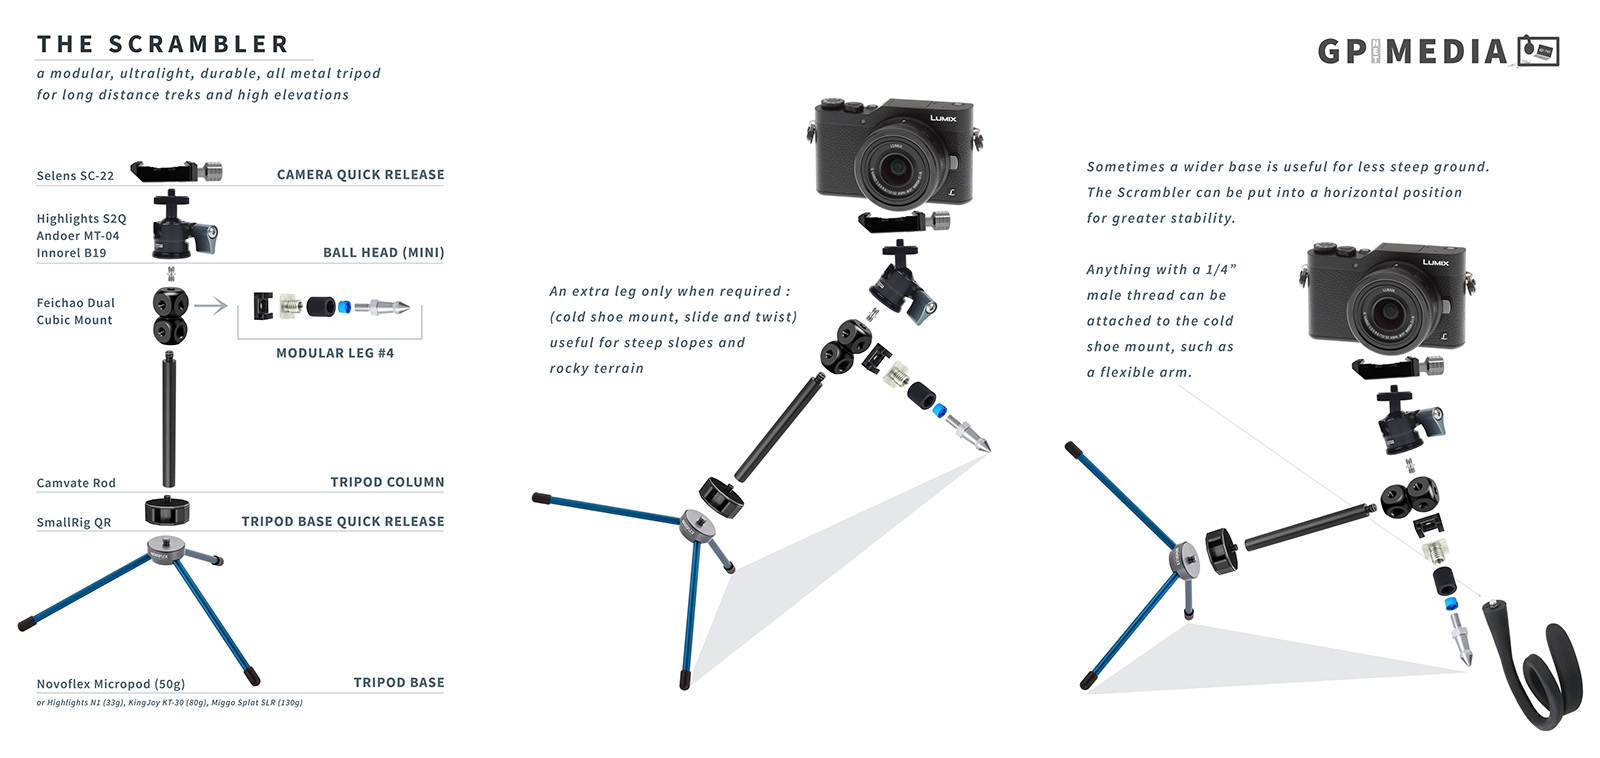 The Scrambler Ultralight Mini-Tripod For Extreme Outdoor Pursuits